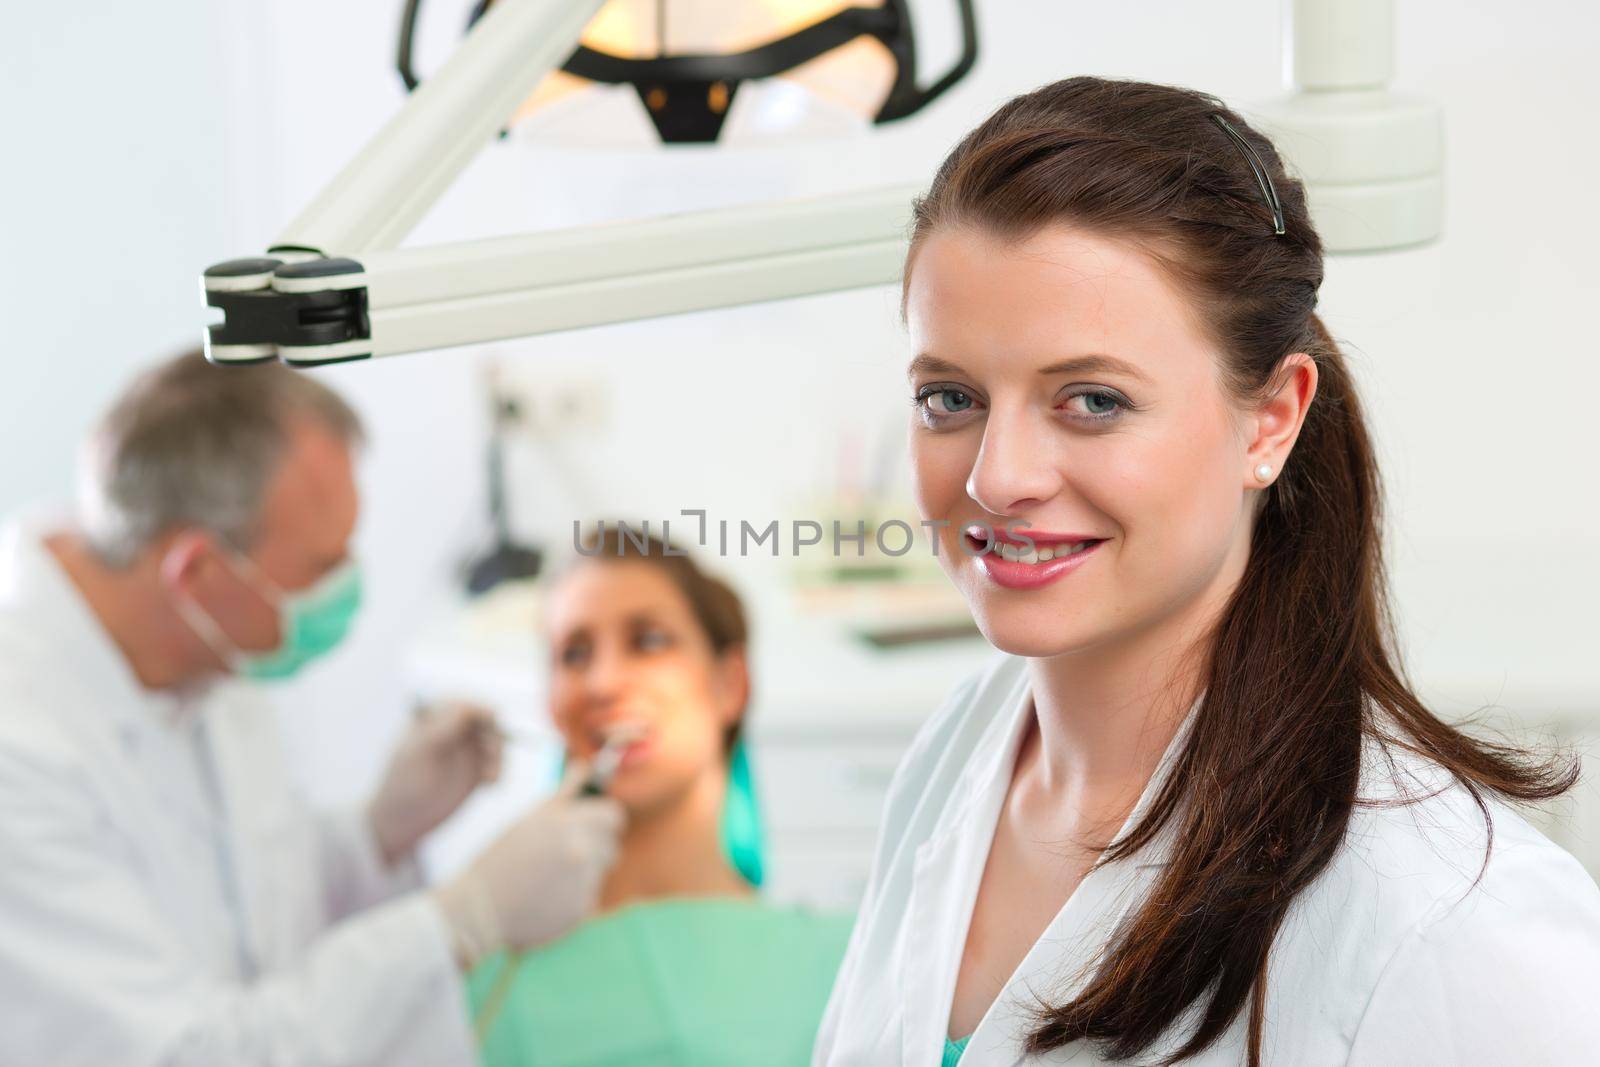 Dentists in her surgery looking at the viewer, in the background her colleague is giving a female patient a treatment